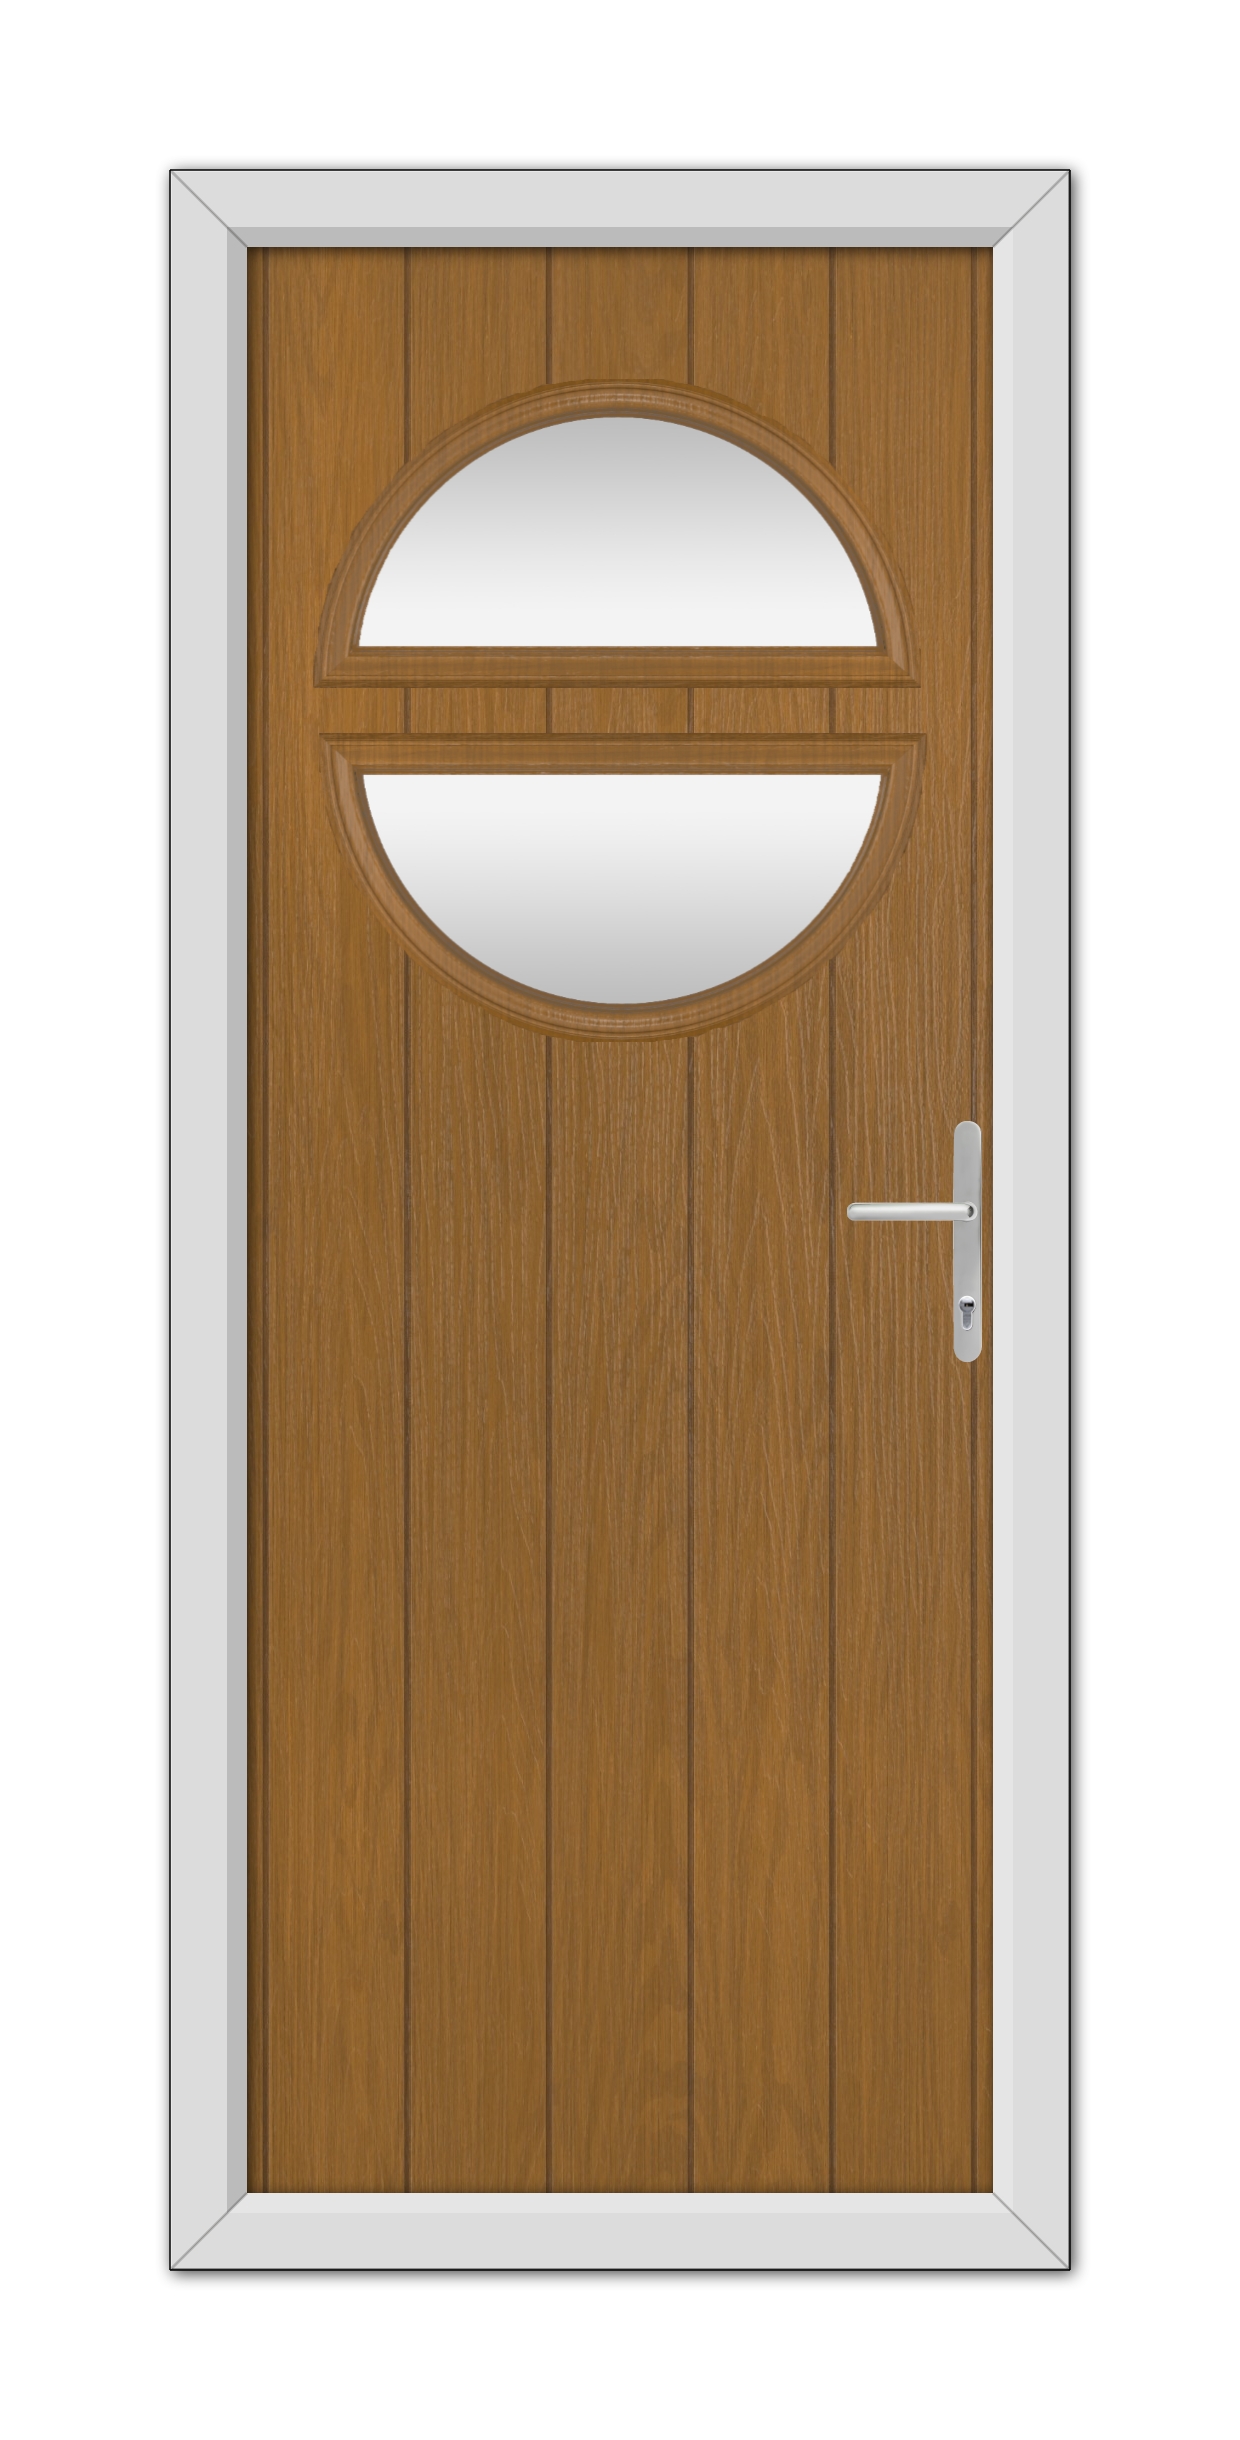 A modern Oak Kent Composite Door 48mm Timber Core with a half-circle glass window at the top, framed in white with a metal handle on the right side.